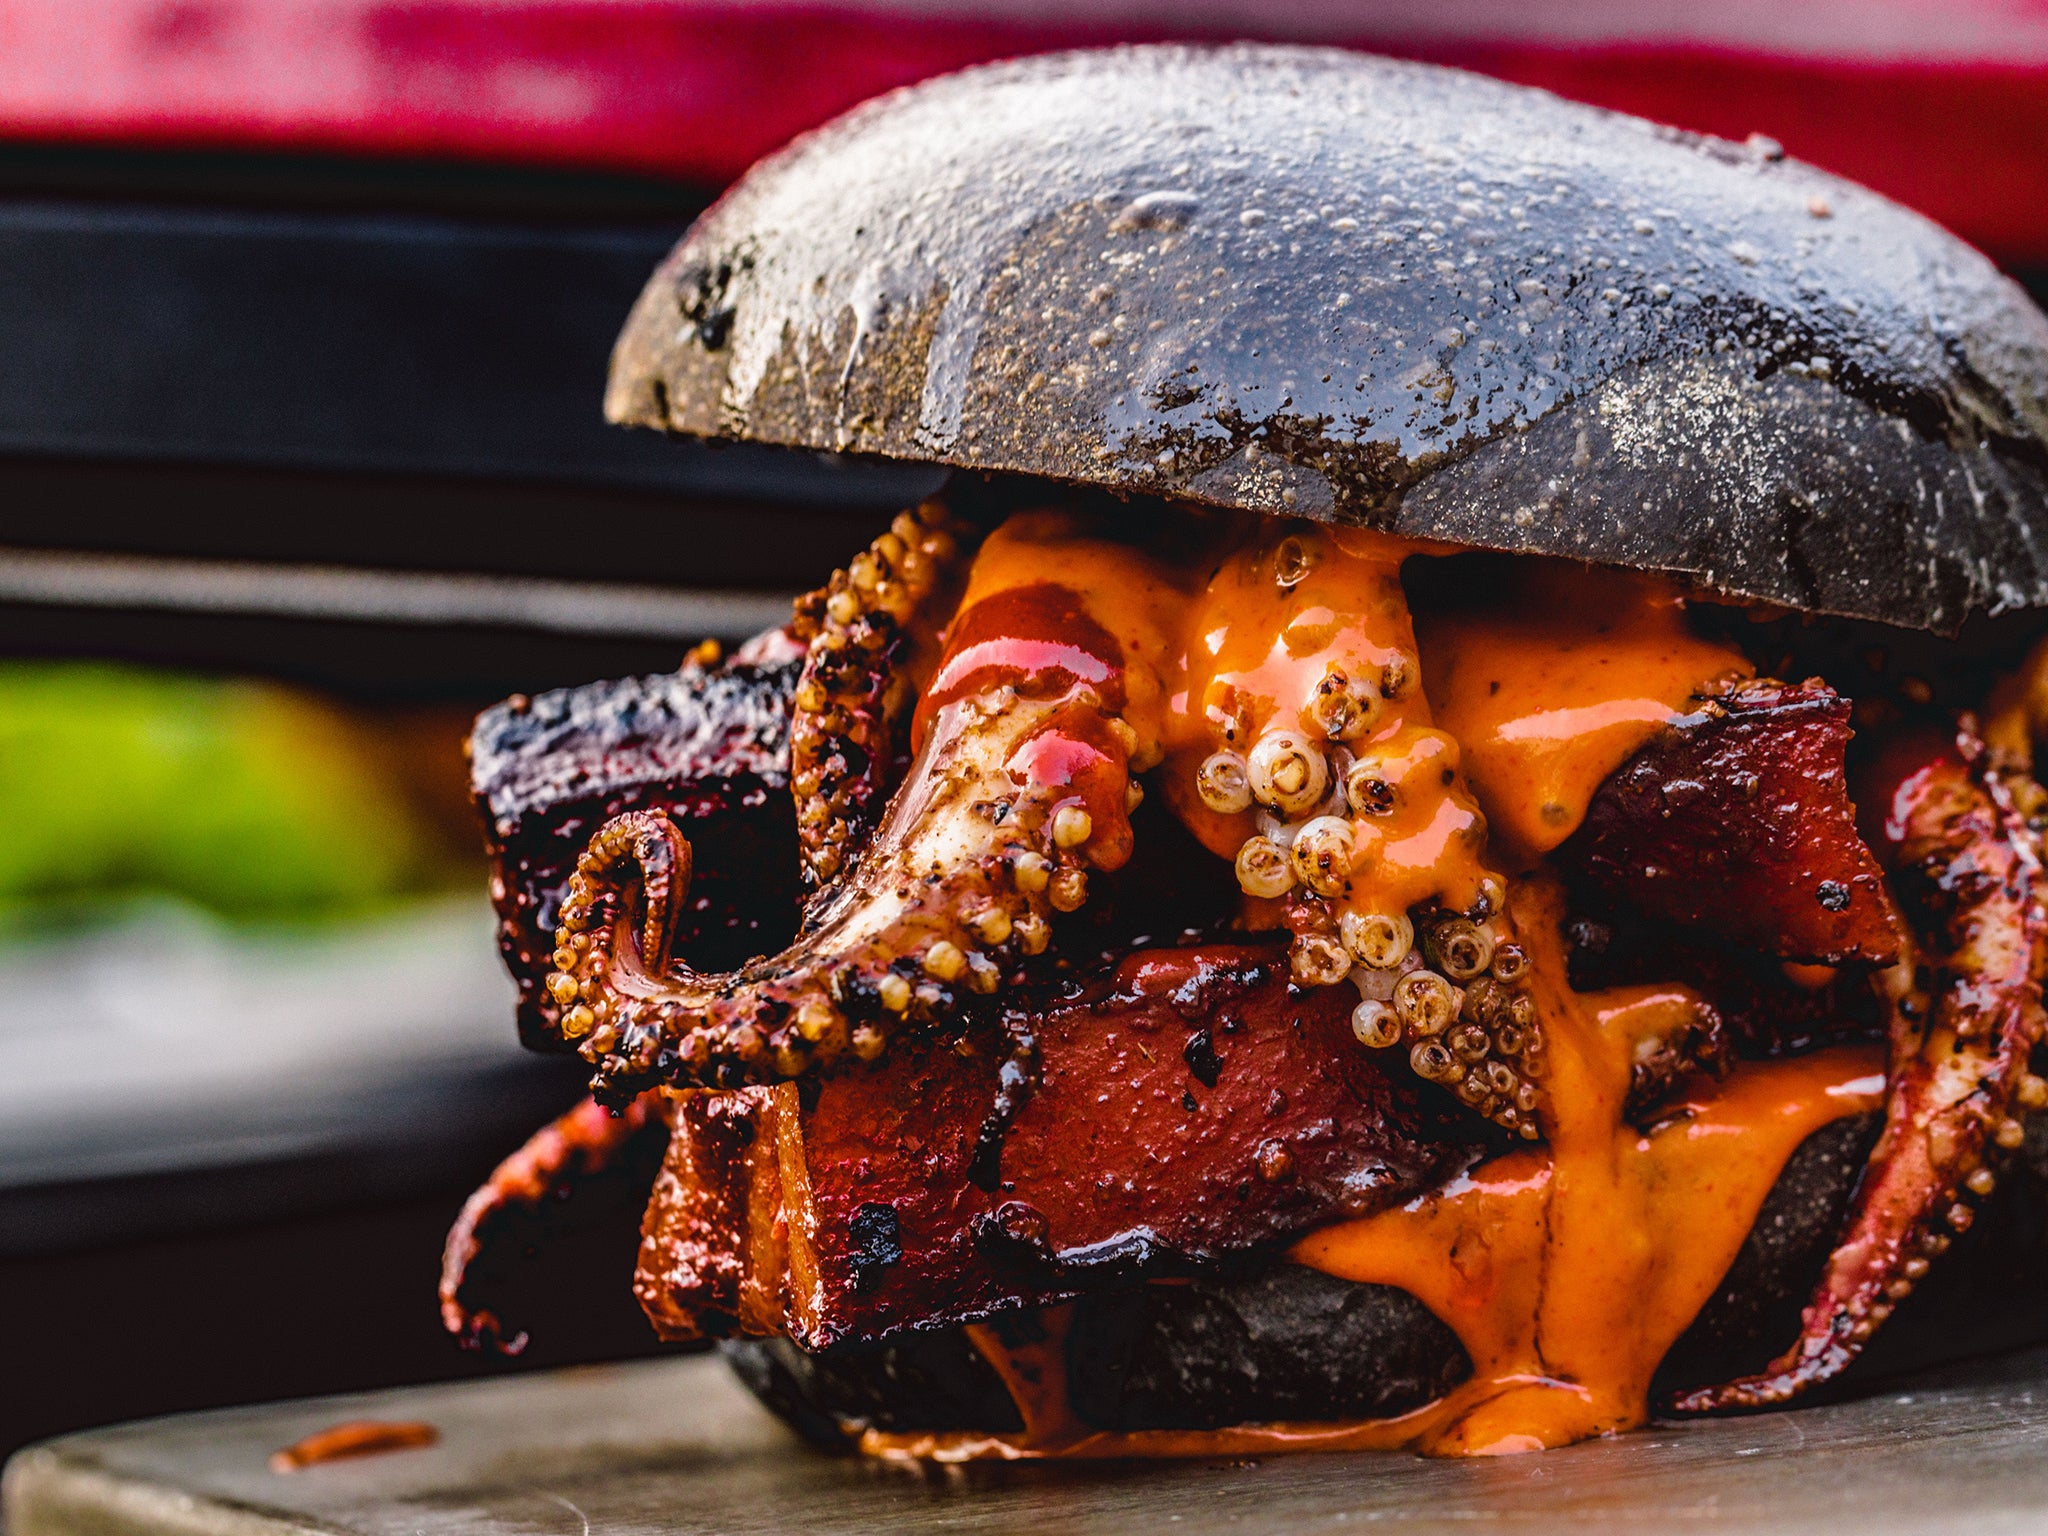 A blood-curdling burger from the deep